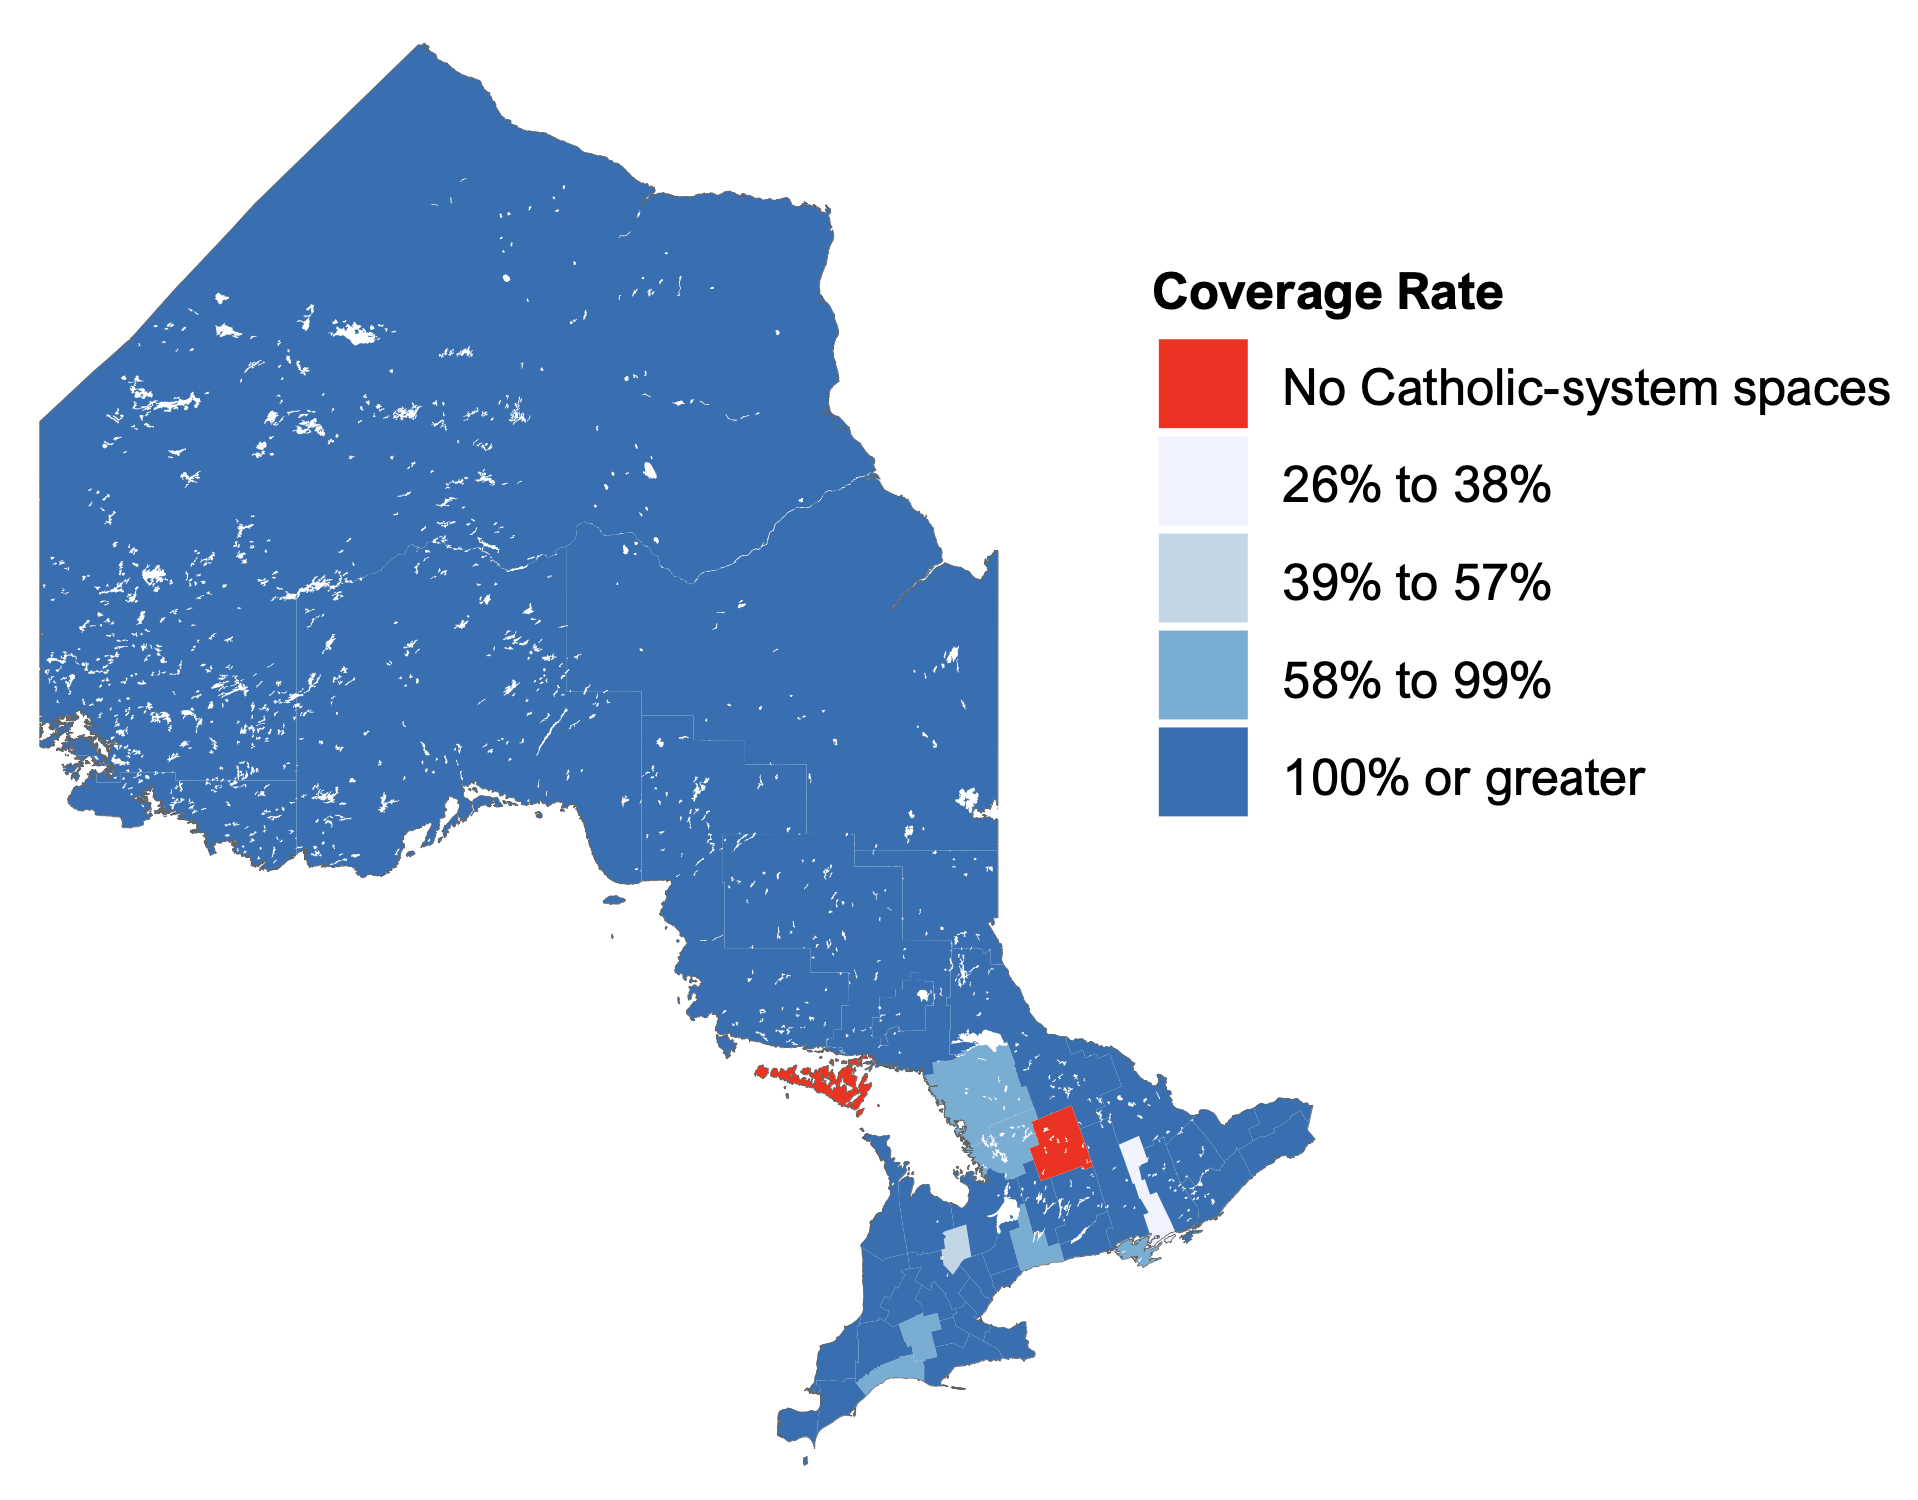 Figure 3.8 show the coverage rates for Catholic school system spaces by census division for the 2021-22 school year. Of the Province’s 49 census division, 38 have a Catholic-system coverage rate greater than 100 per cent, and an additional eight have coverage ratios below 100 per cent but greater than 50 per cent. Of the remaining three census divisions, one has a coverage rate of 36 per cent (Lennox and Addington) and two, Haliburton and Manitoulin, have no Catholic-system schools. 